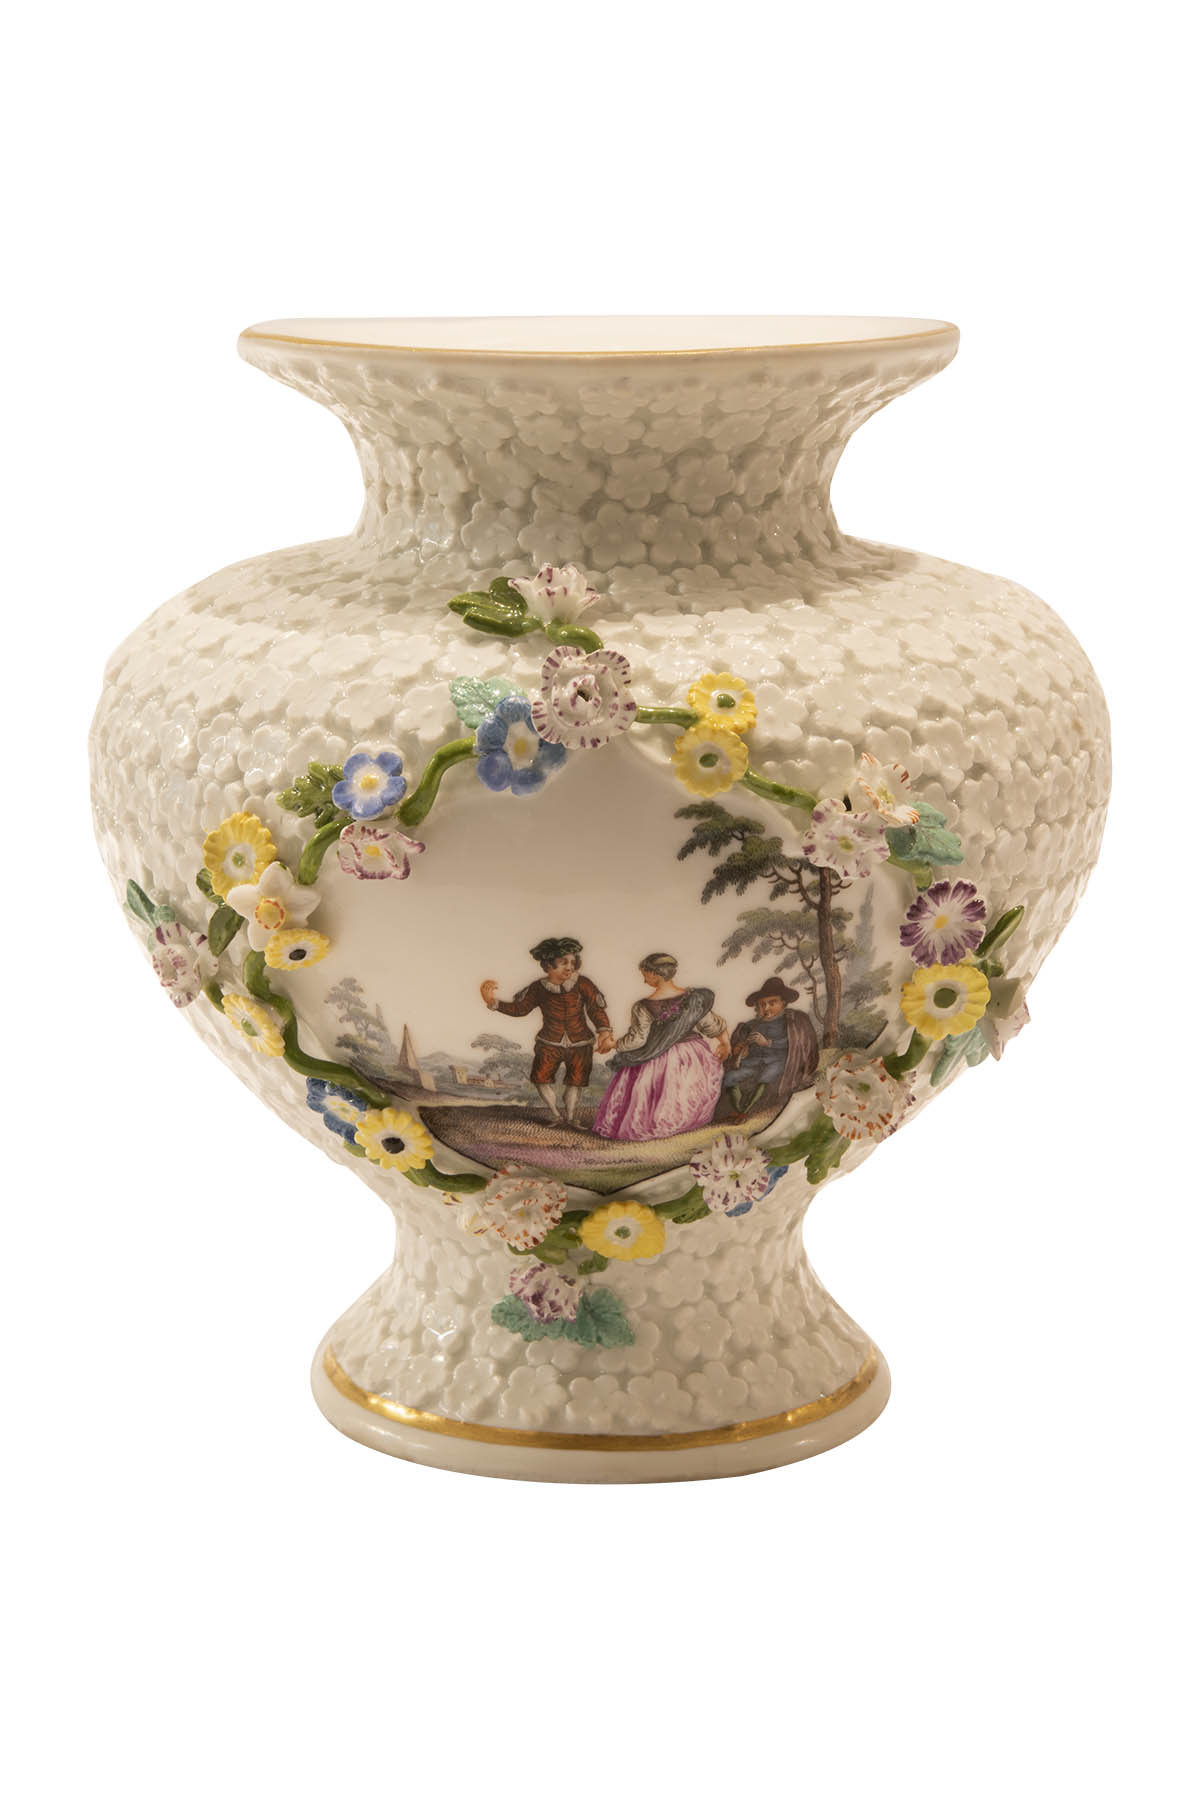 Ornamental vase with forget-me-not decor, Meissen 1740